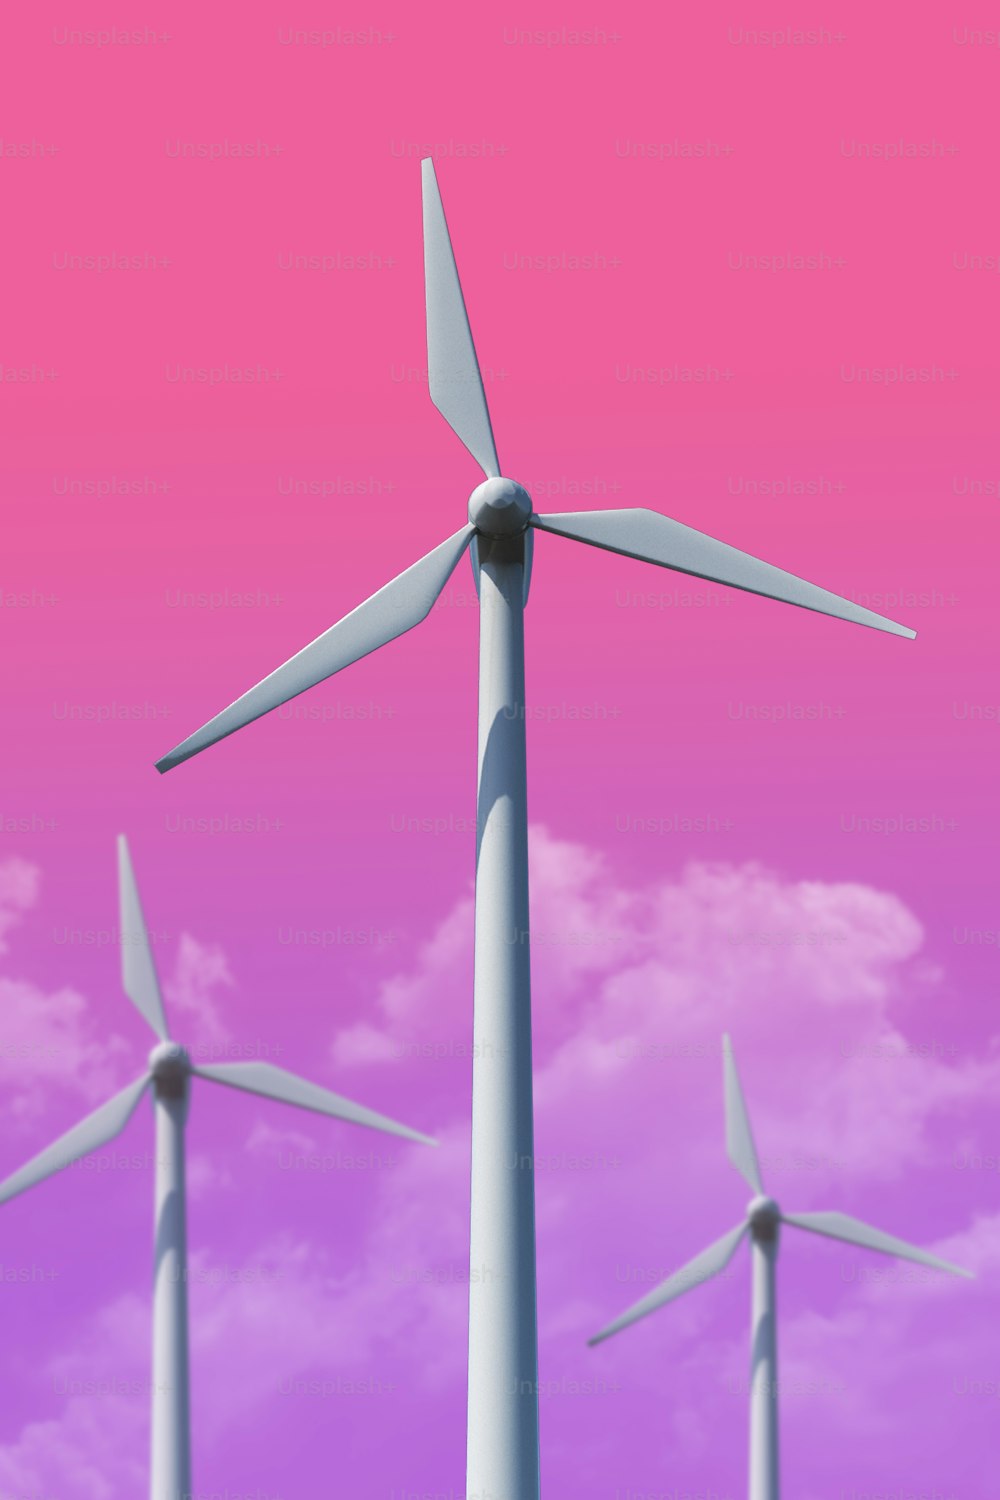 a group of wind turbines against a pink sky